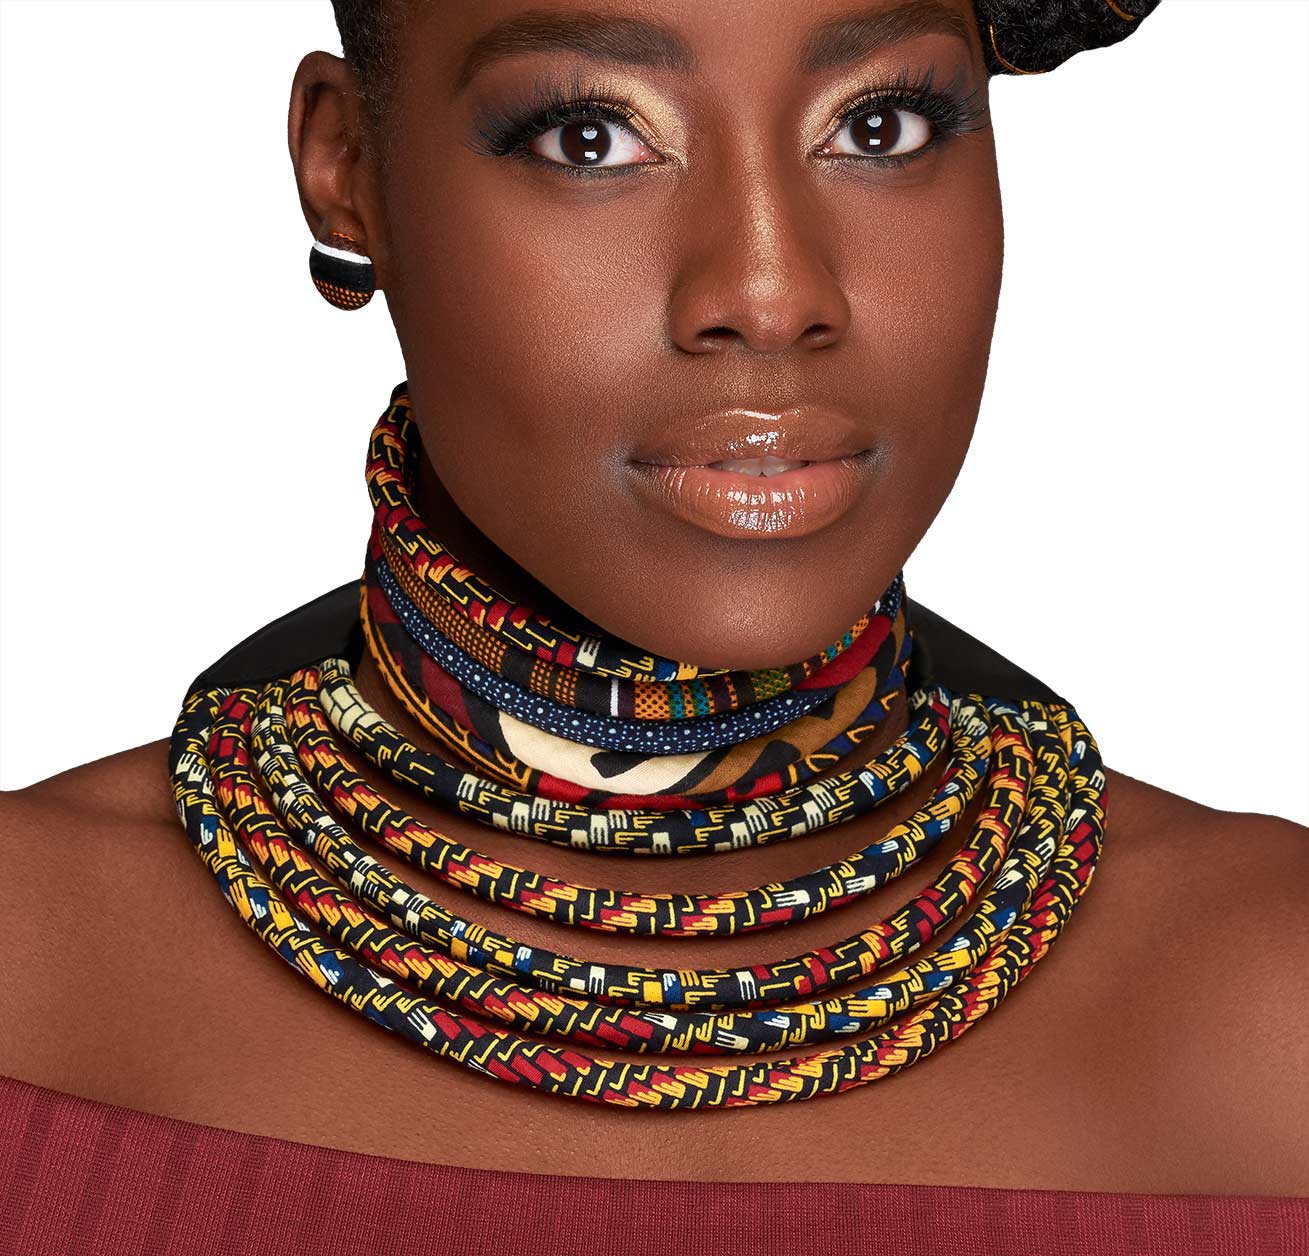 African fabric choker  Chokers, African fabric, African necklace